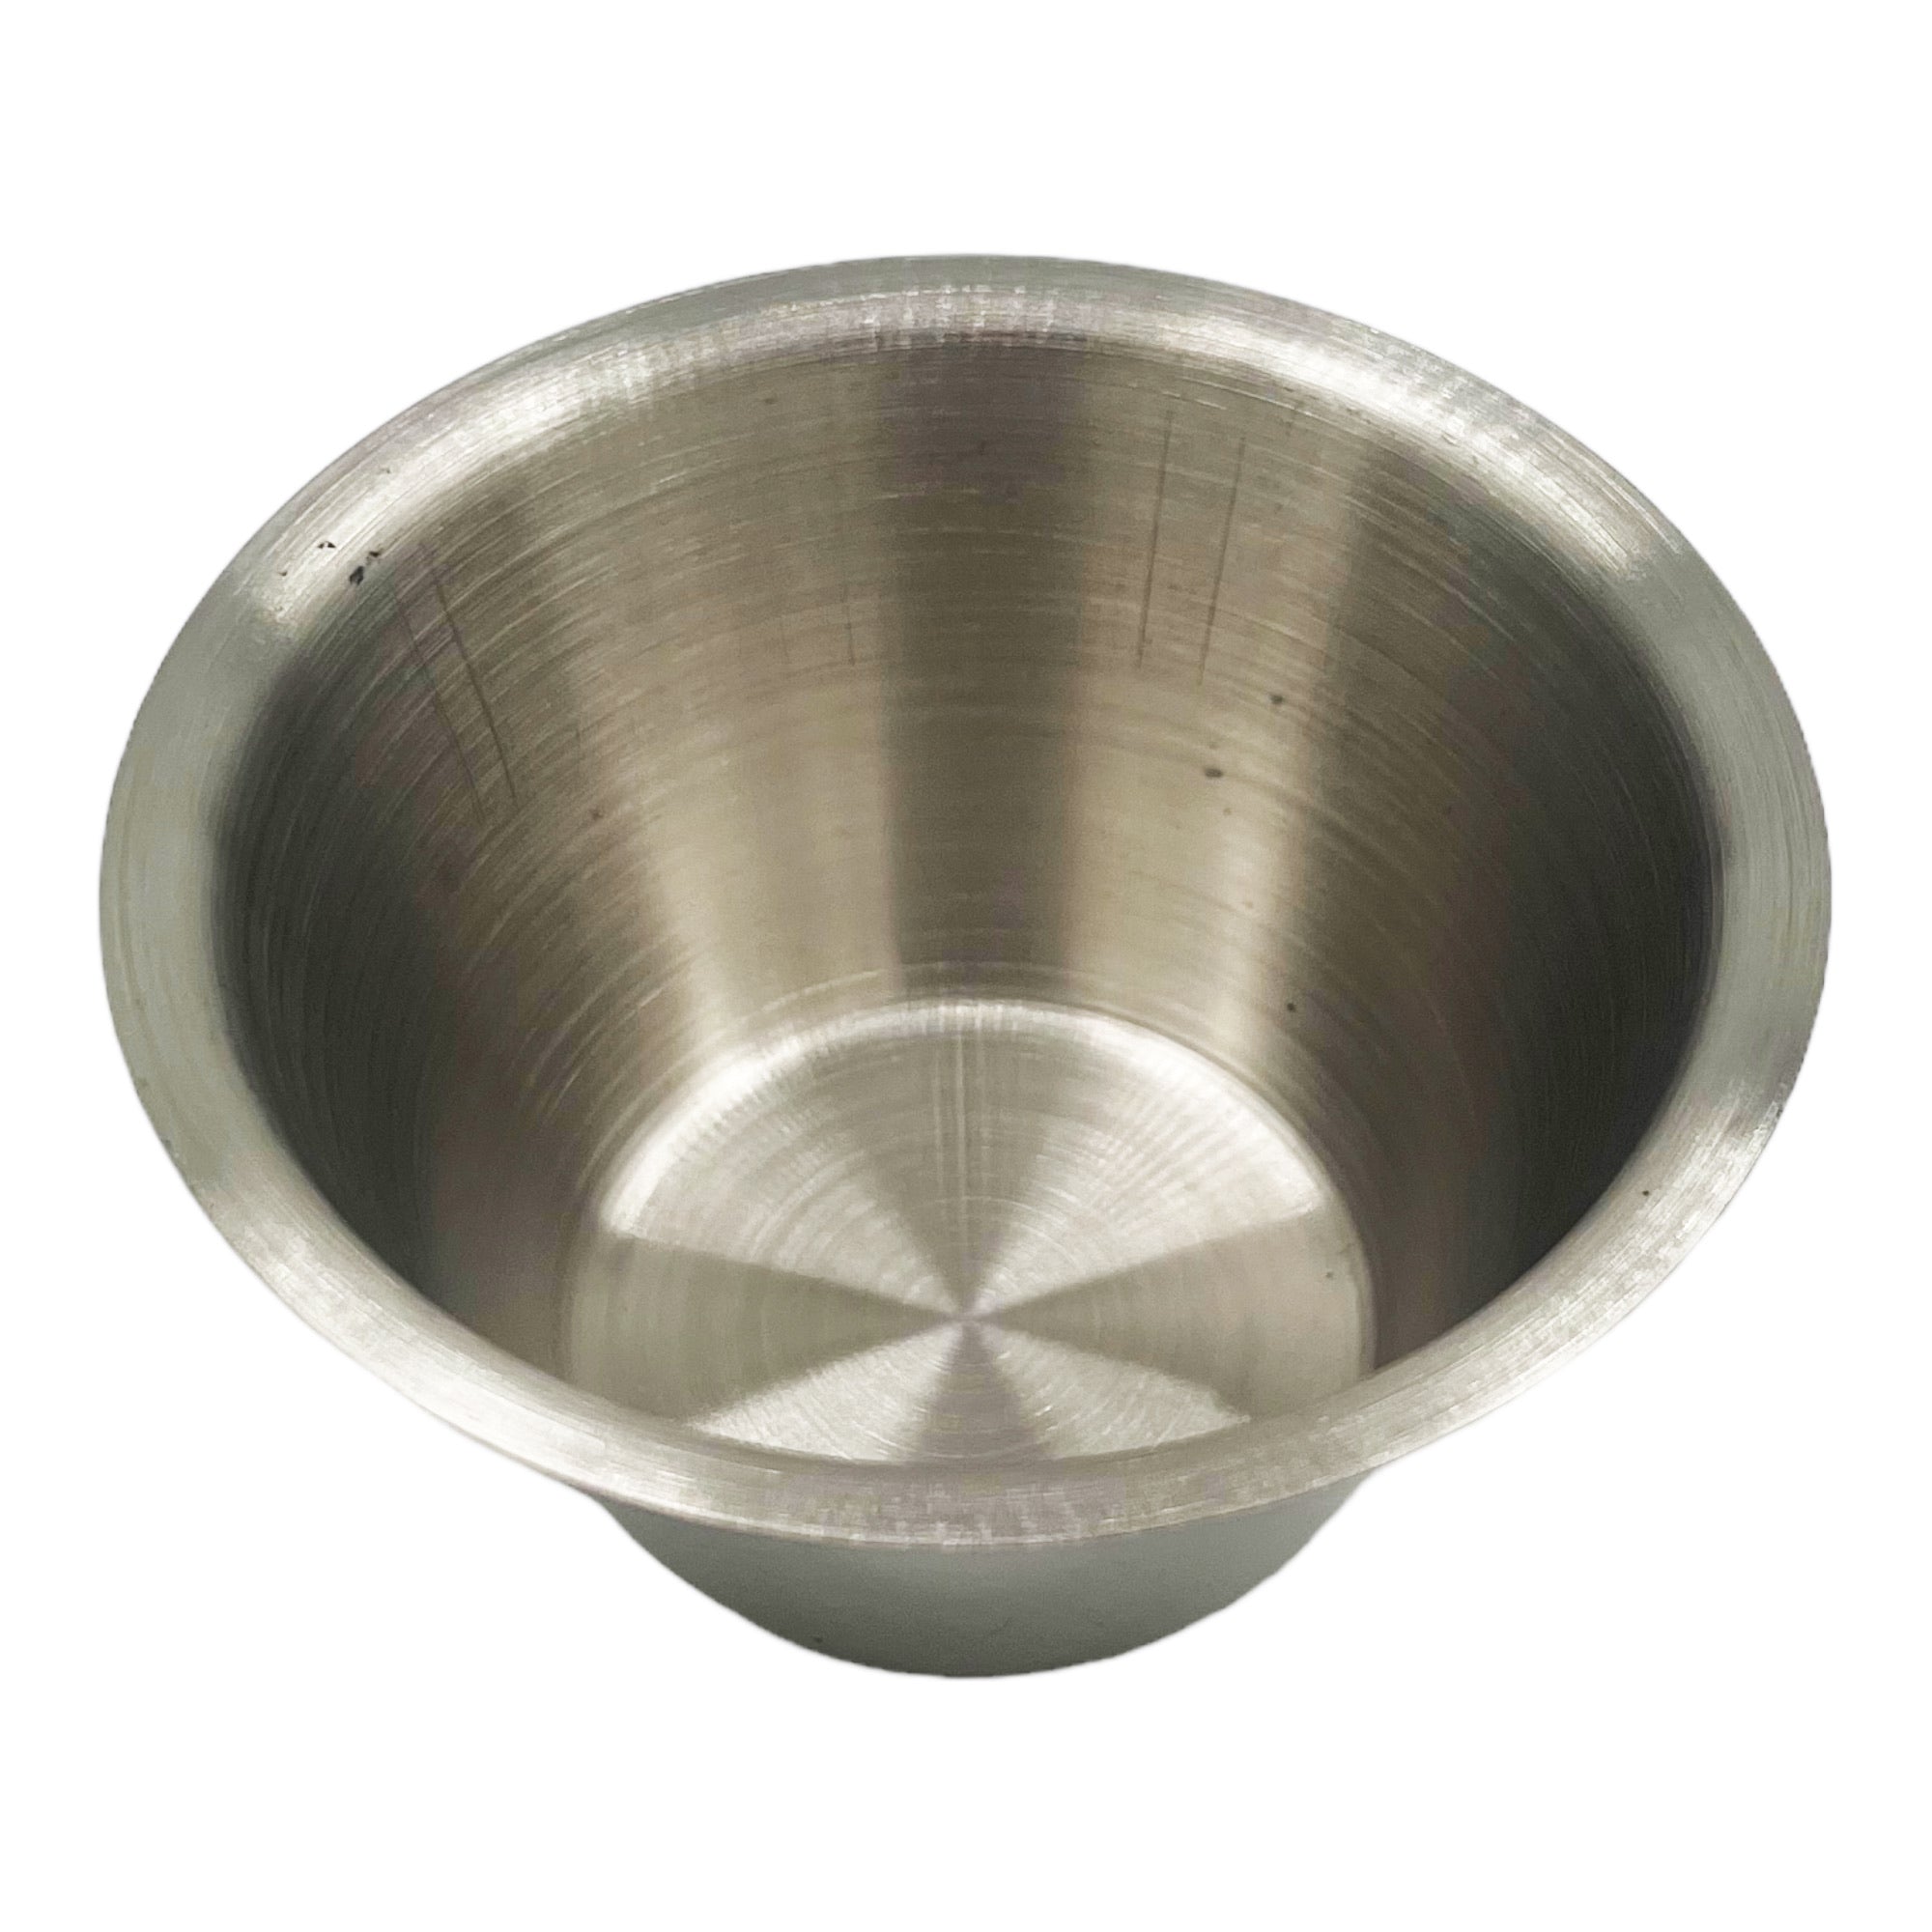 Eson - Stainless Steel Shaving Bowl Cup Silver 5.5x10cm - Eson Direct